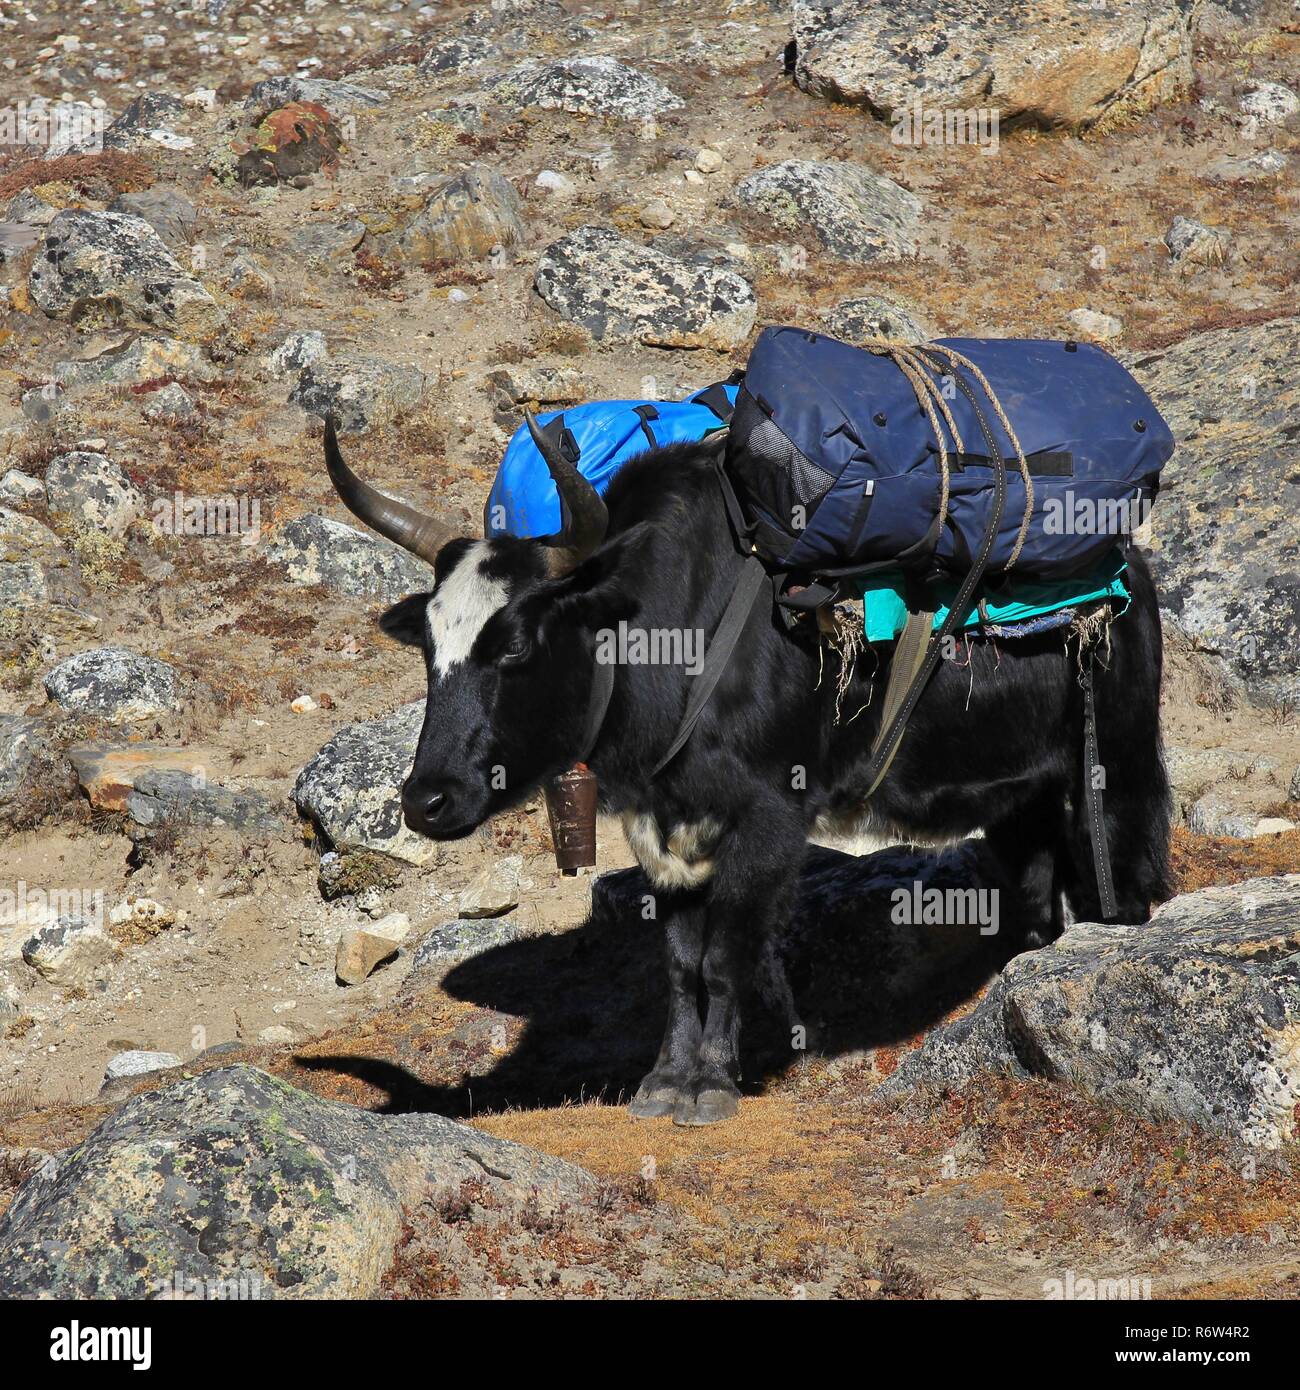 Dzo, hybrid between the yak and domestic cattle. Used as pack